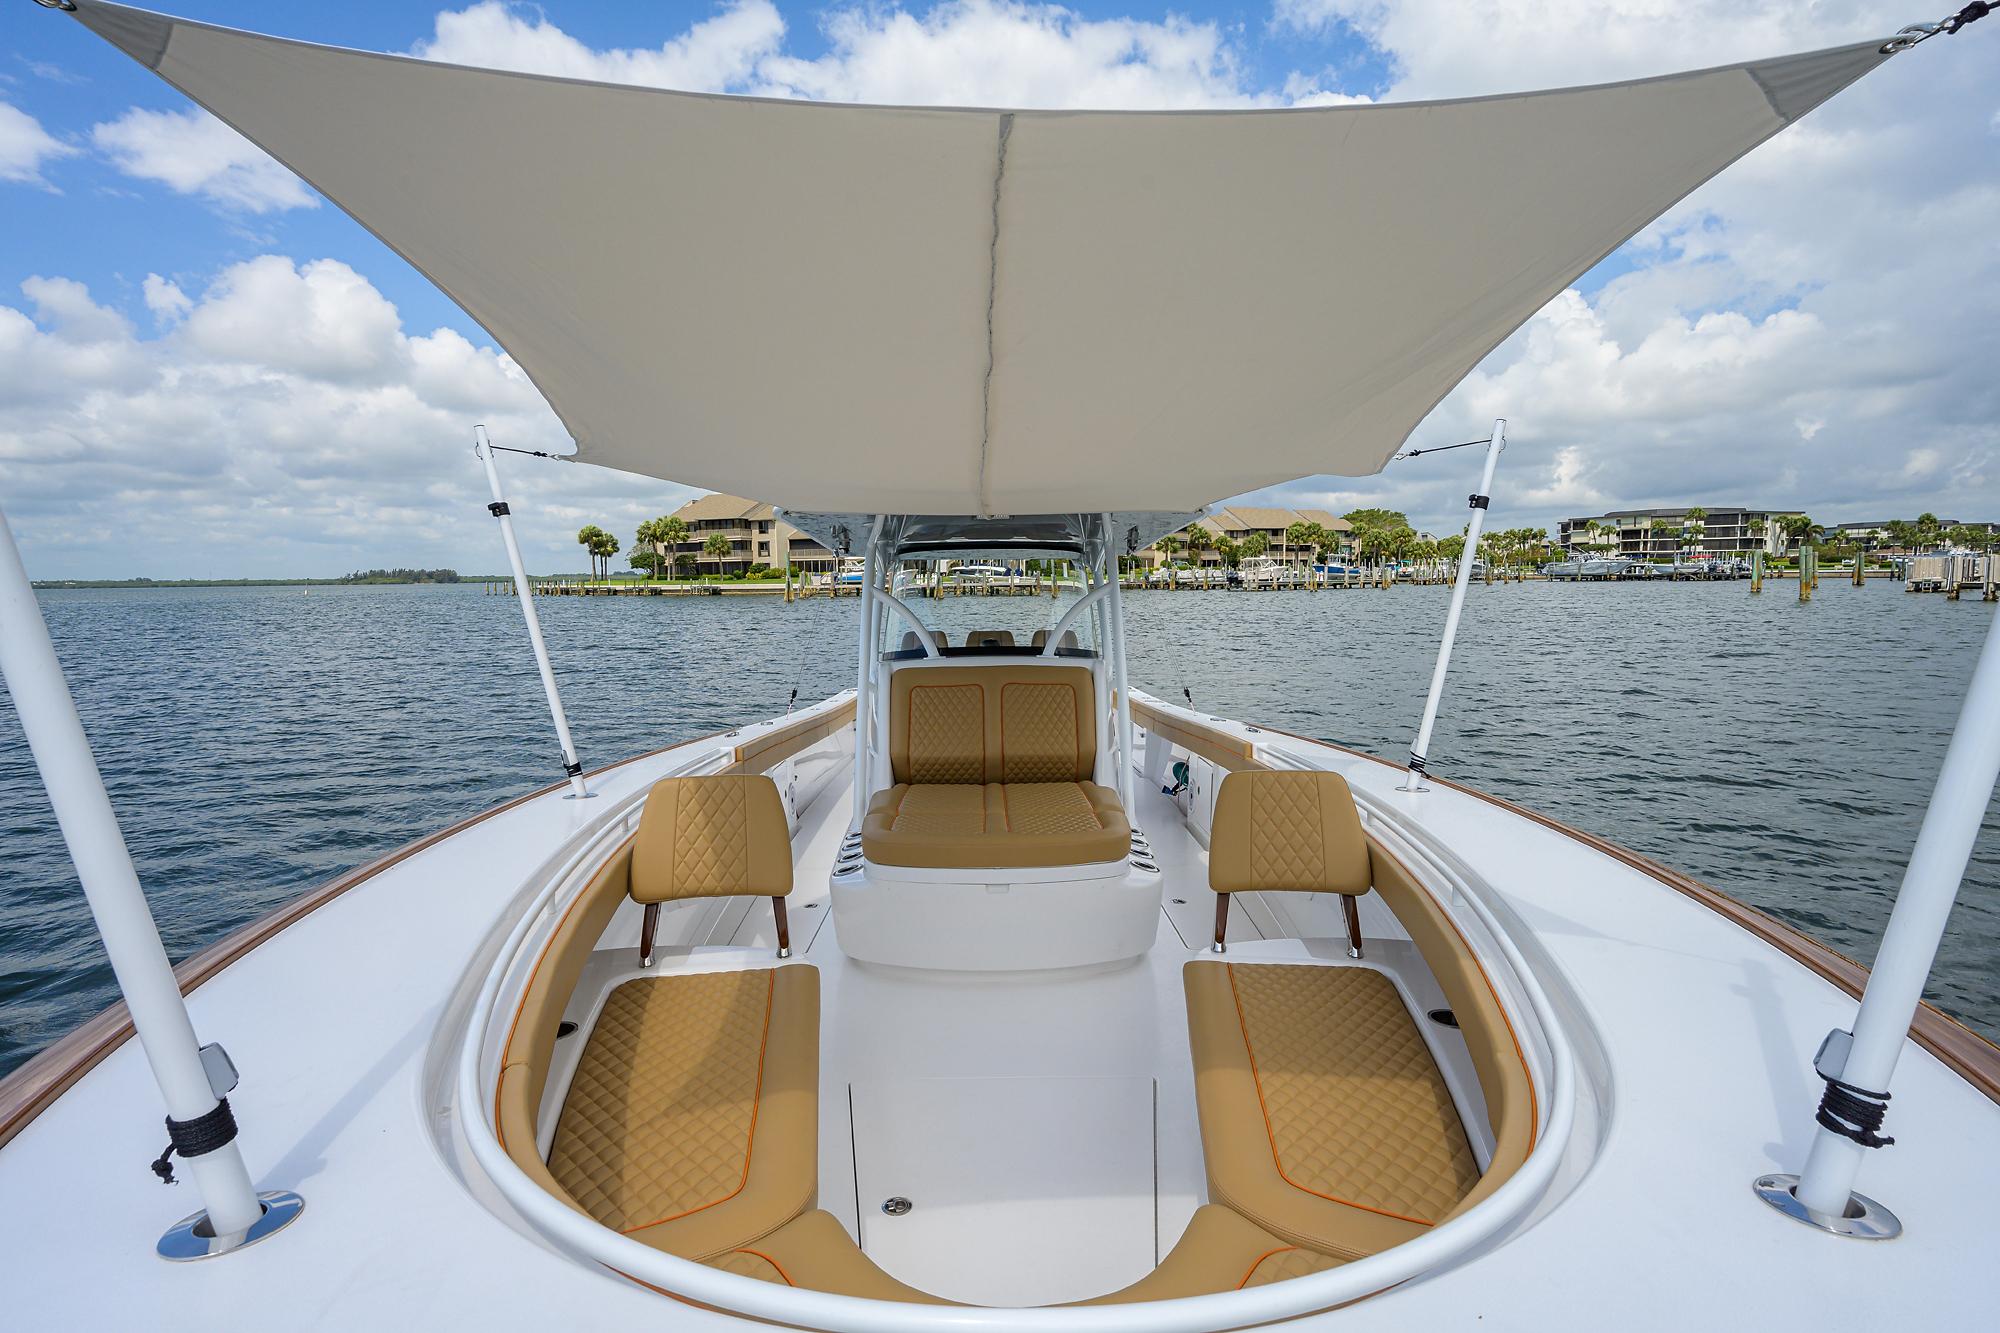 Valhalla 41 Reel Time - Forward Bow Seating, Sun Shade